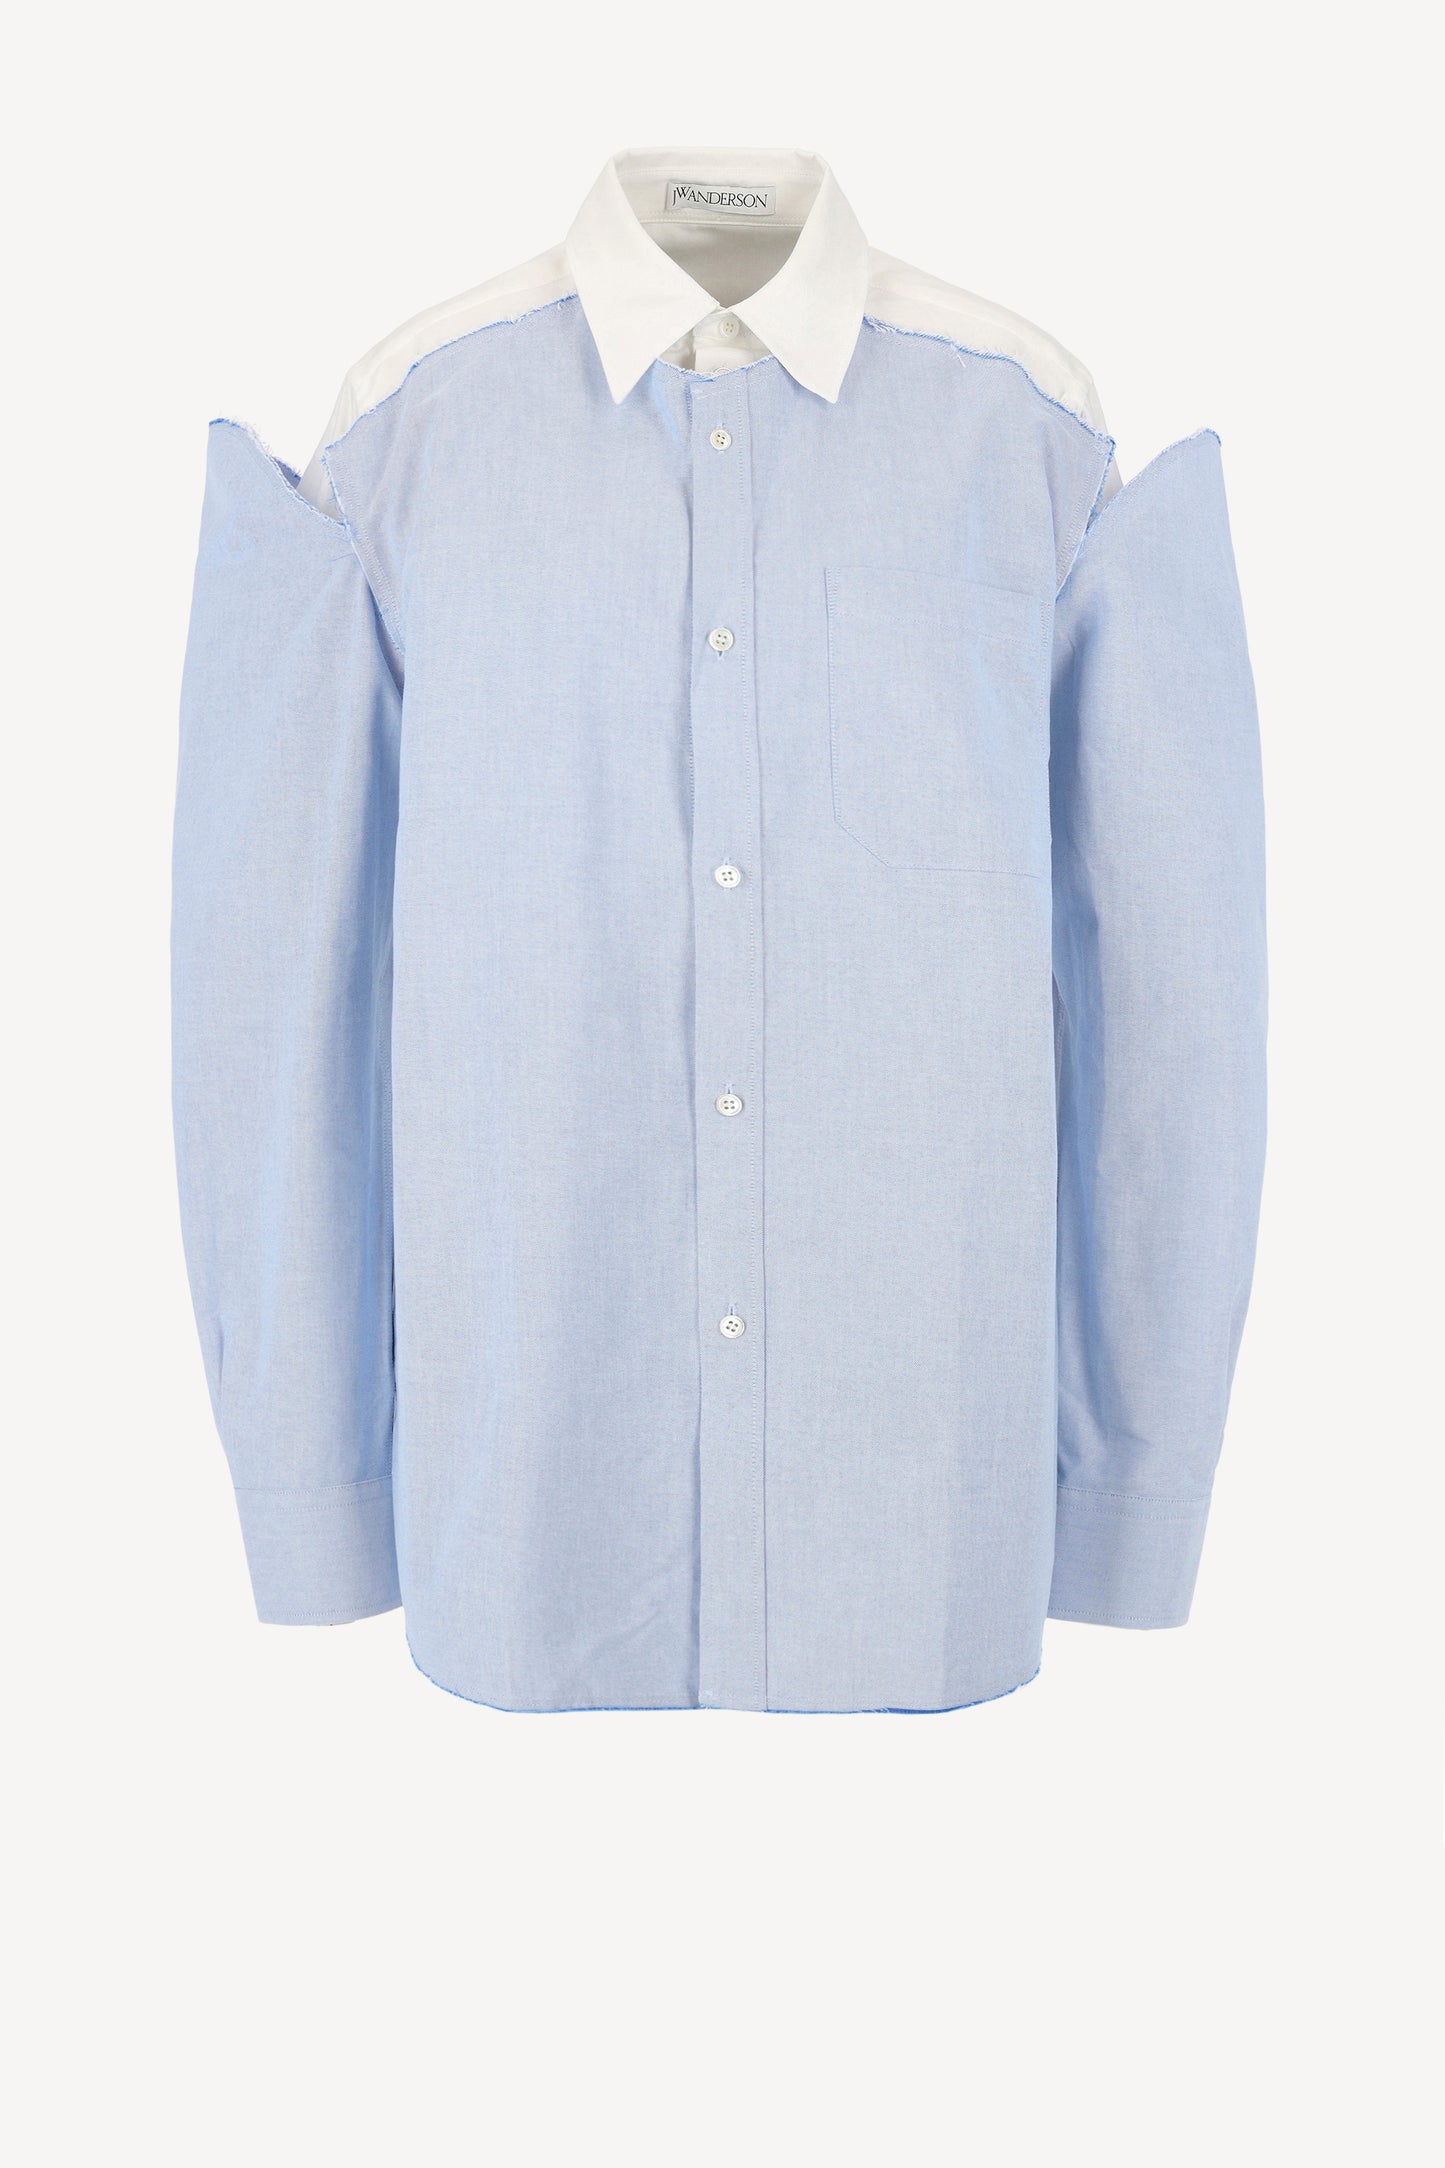 Bluse Double Layer in Blau/WeißJW Anderson - Anita Hass